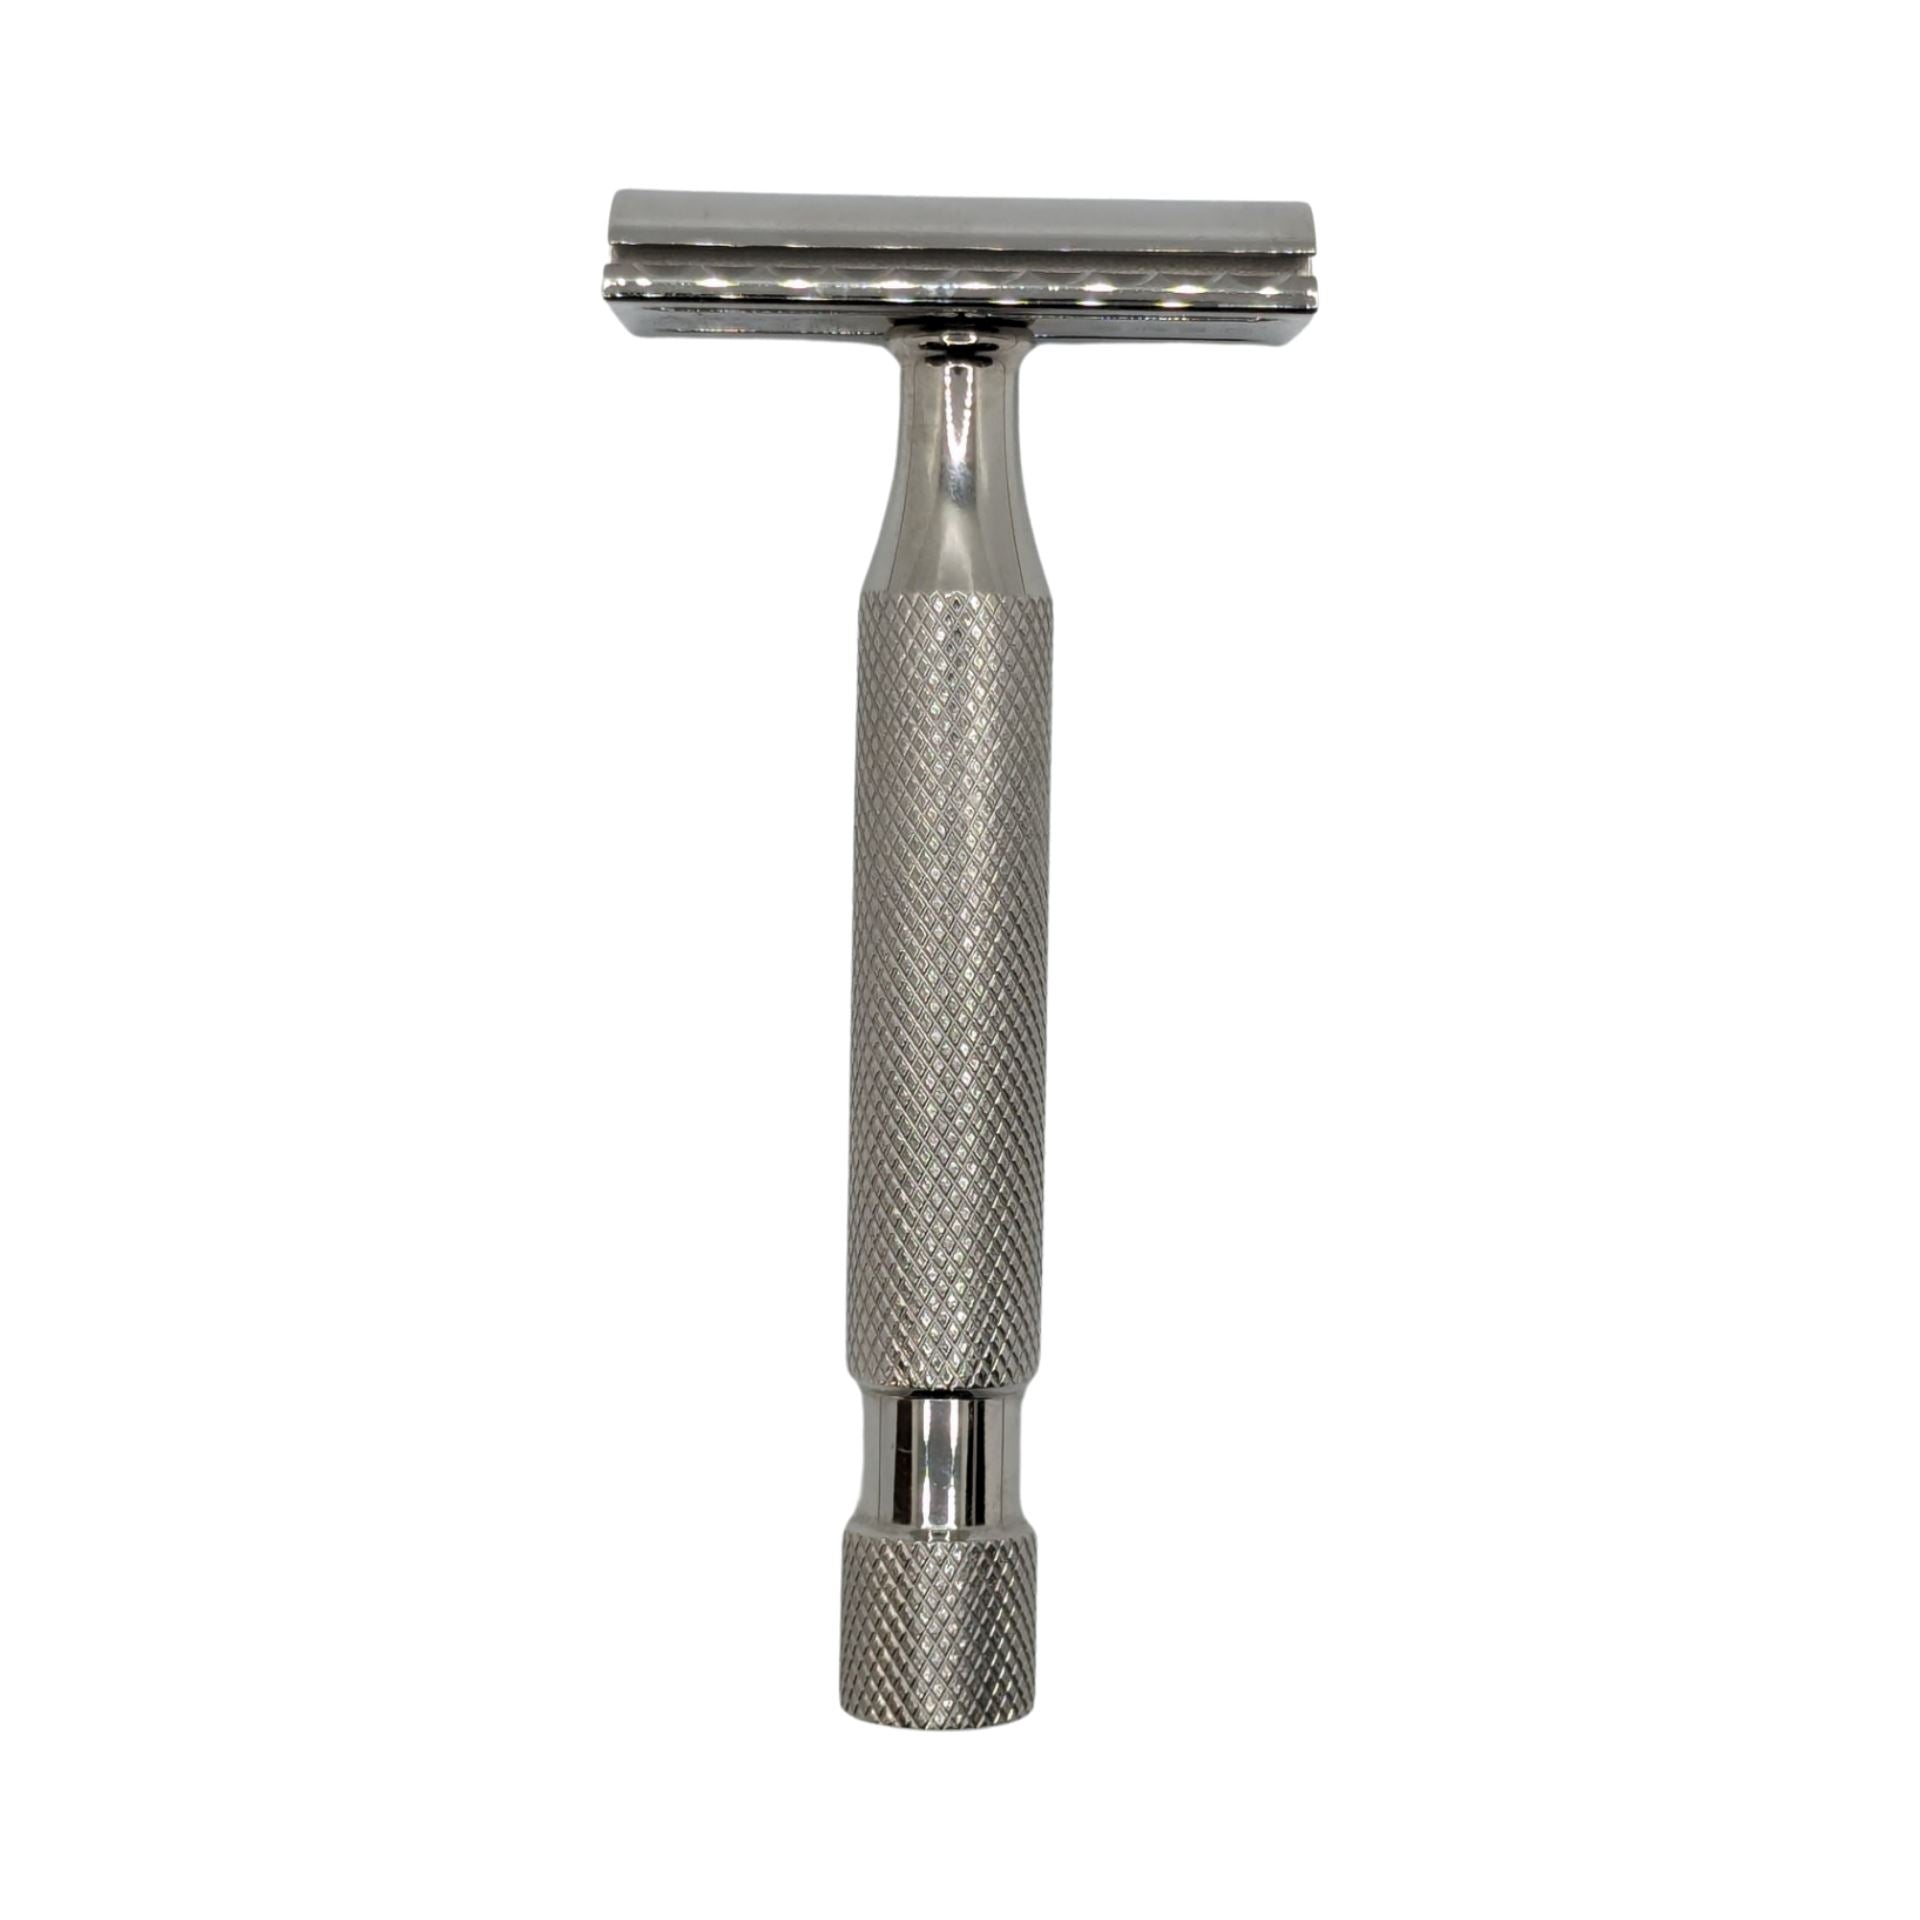 Windsor Pro Polished Stainless Steel Safety Razor (SB90) - by Above the Tie (Used)